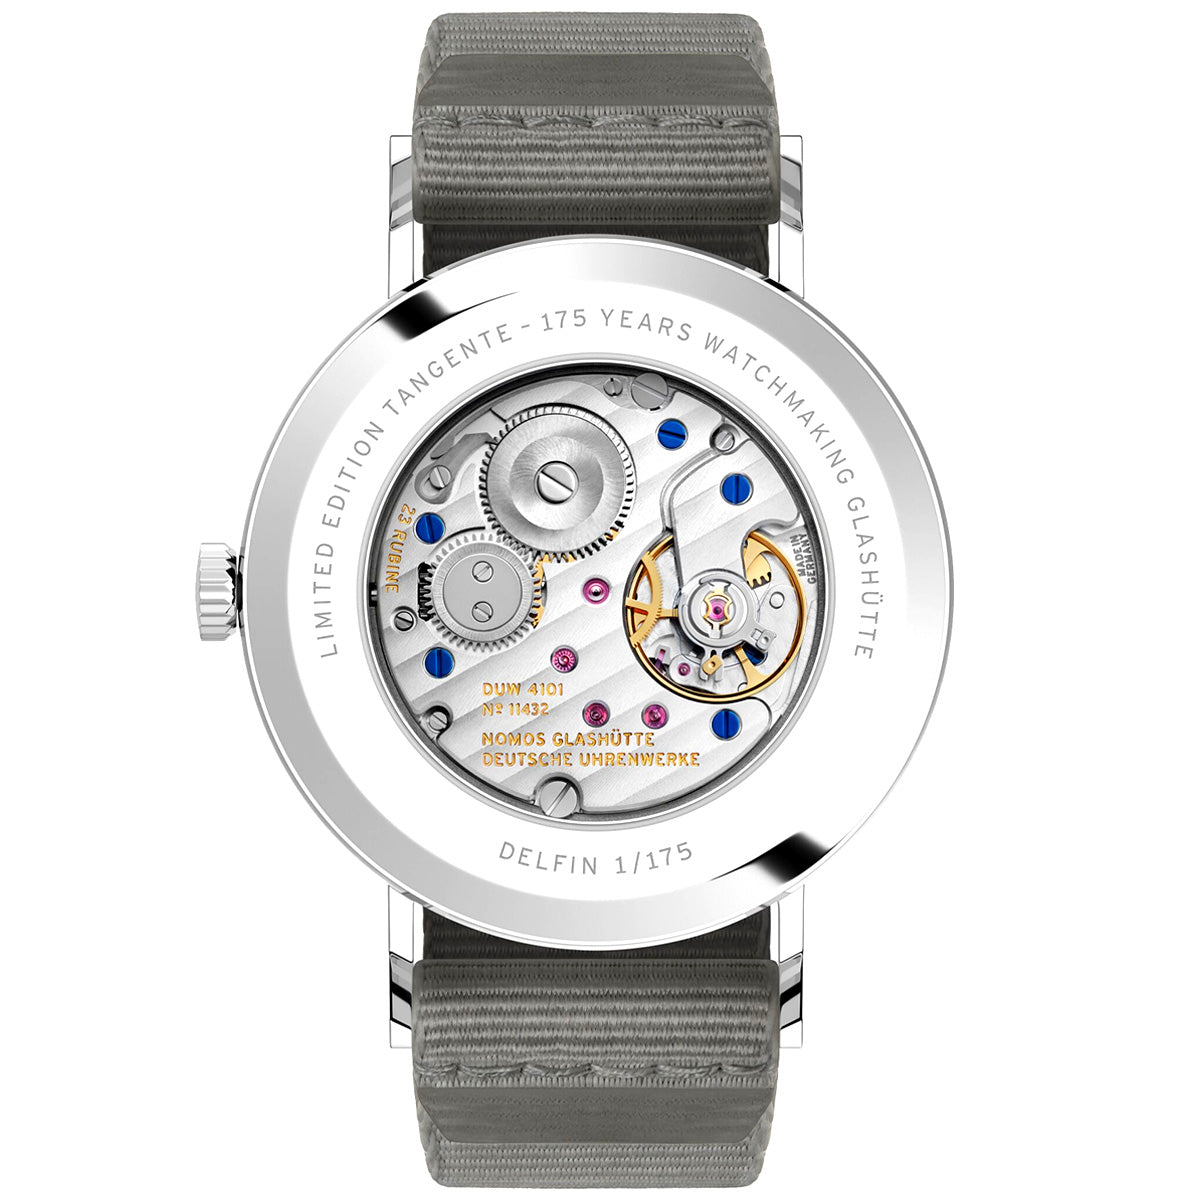 Tangente 38mm 'Delfin' Limited Edition Watch